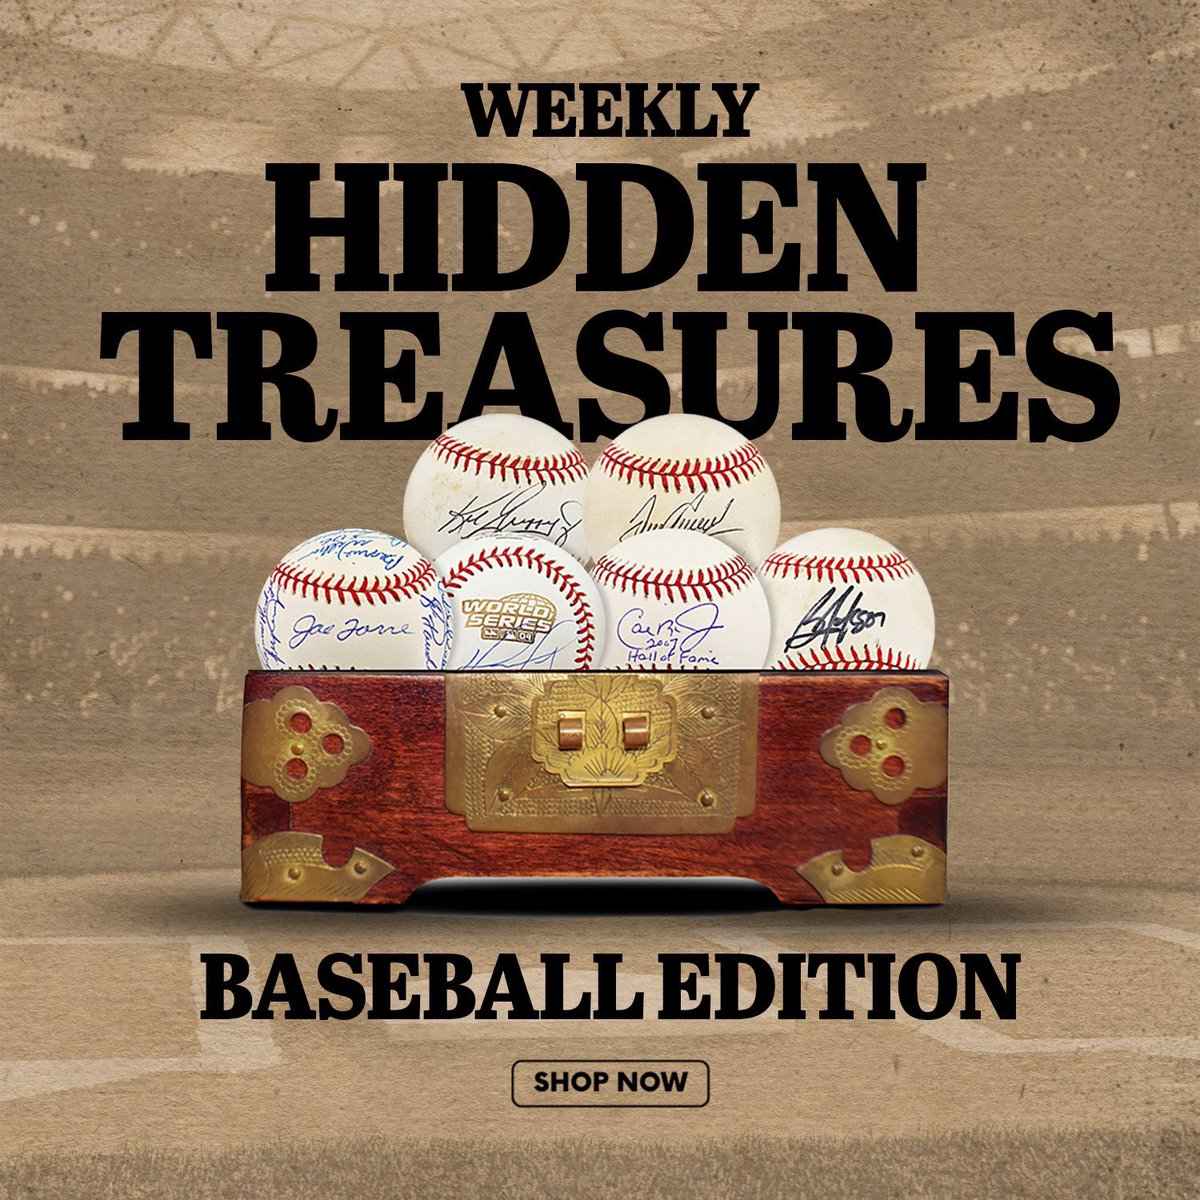 Check out our all new Hidden Treasures Collection! All items came from a single collection and there's tons of variety. 500+ items with more being uploaded every week!